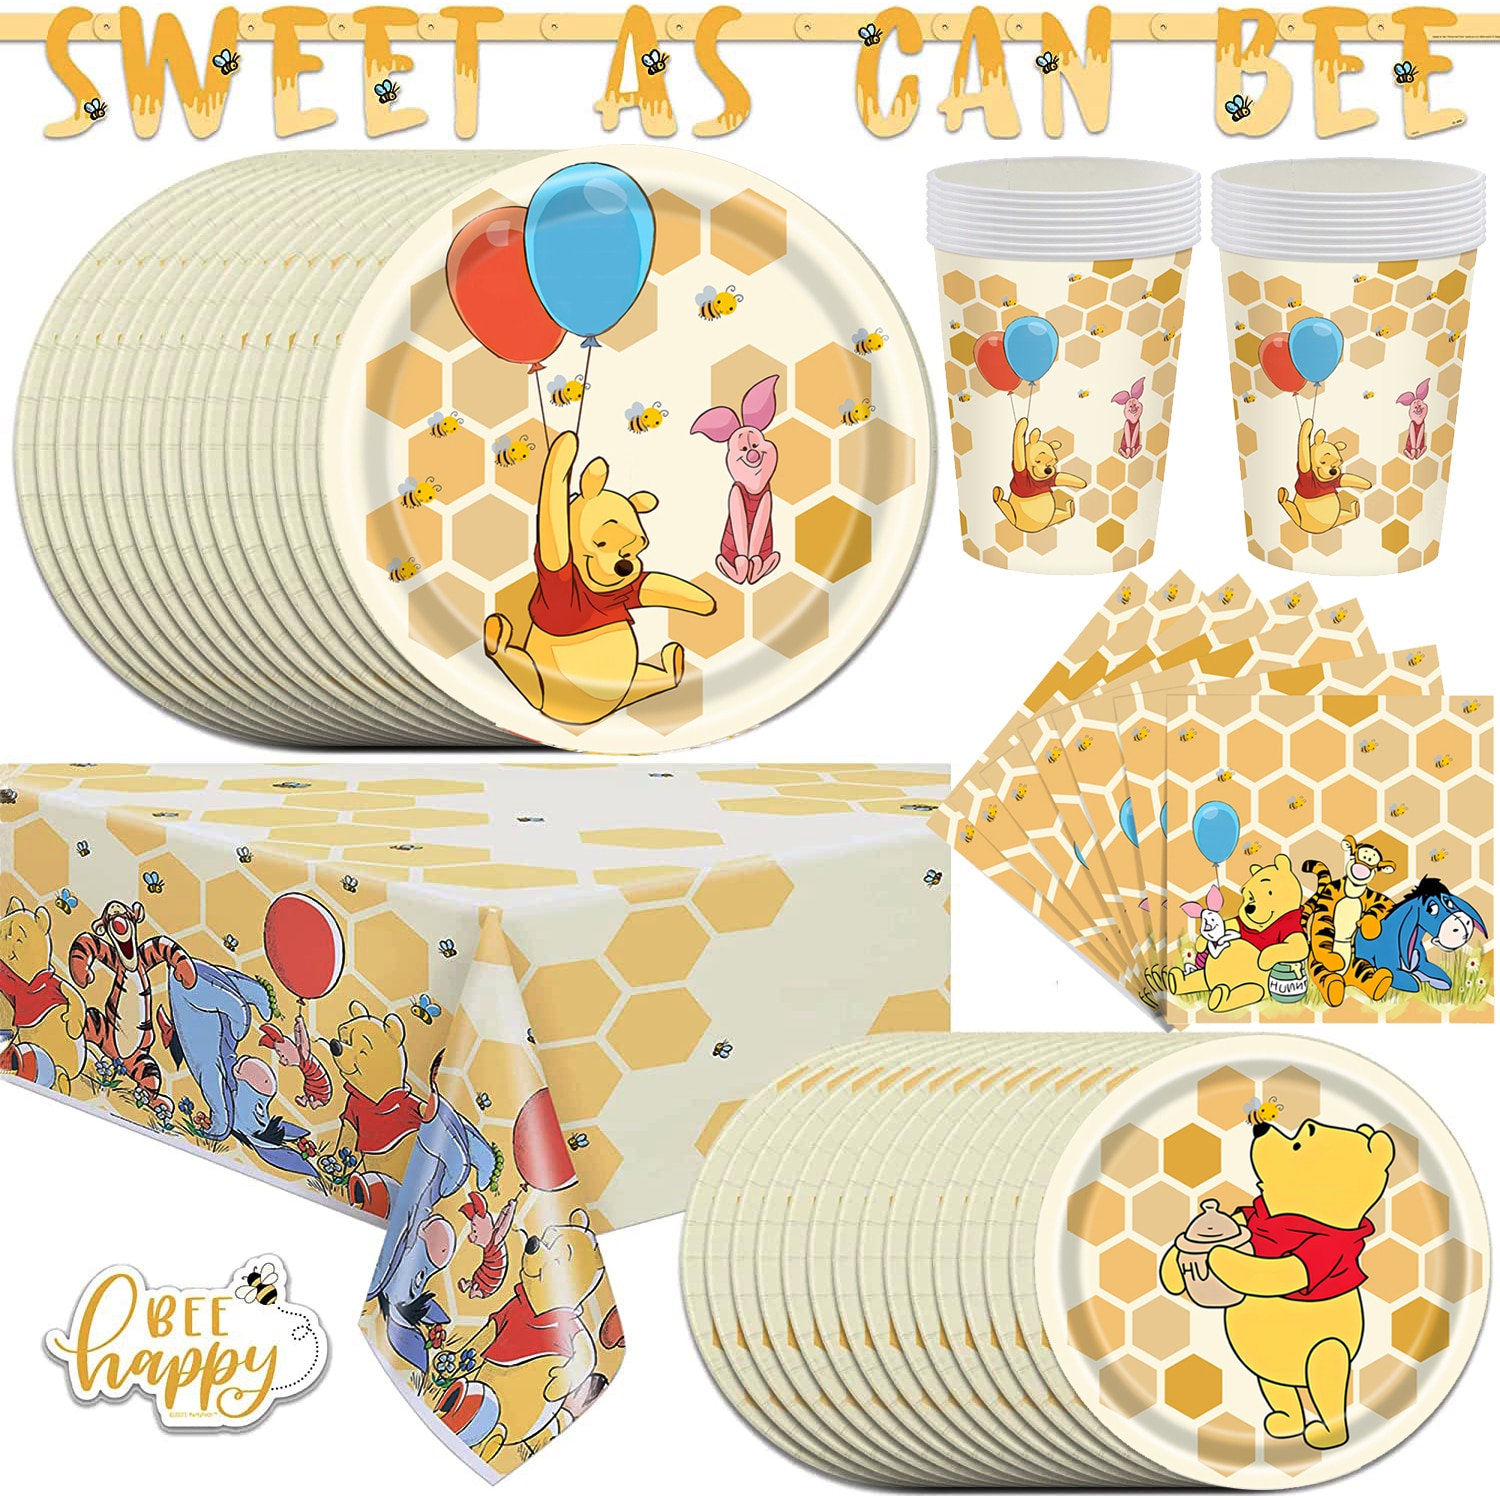 Winnie The Pooh Birthday Party Decorations Serves 10 Guests Plates Napkins Table Cover Balloons Banner For - Winnie The Pooh Plush